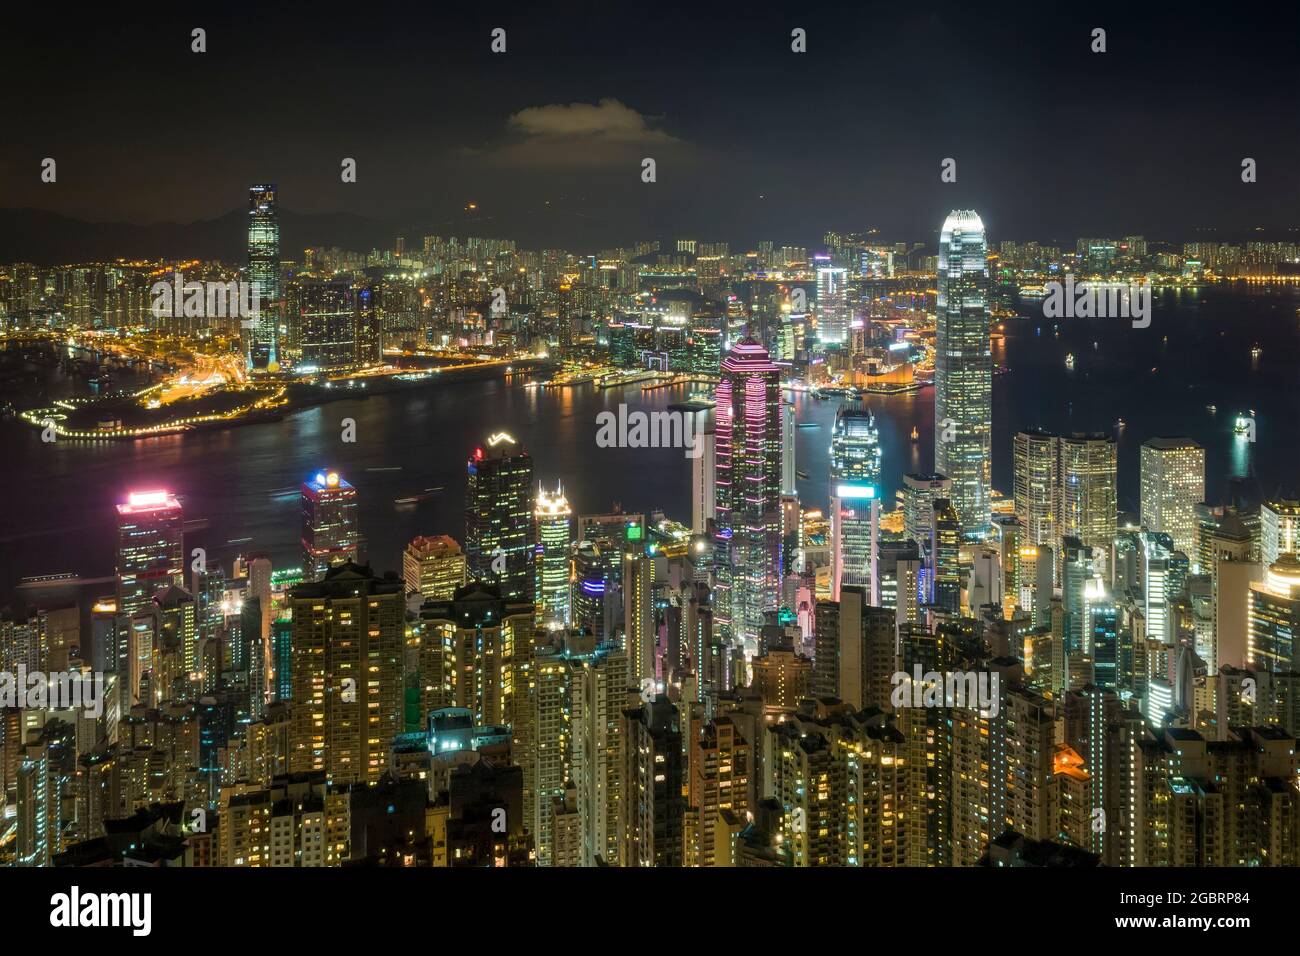 The skyscrapers and high density highrise urban landscape of Mid-levels and Central on Hong Kong Island, and Kowloon across Victoria Harbour, at night Stock Photo